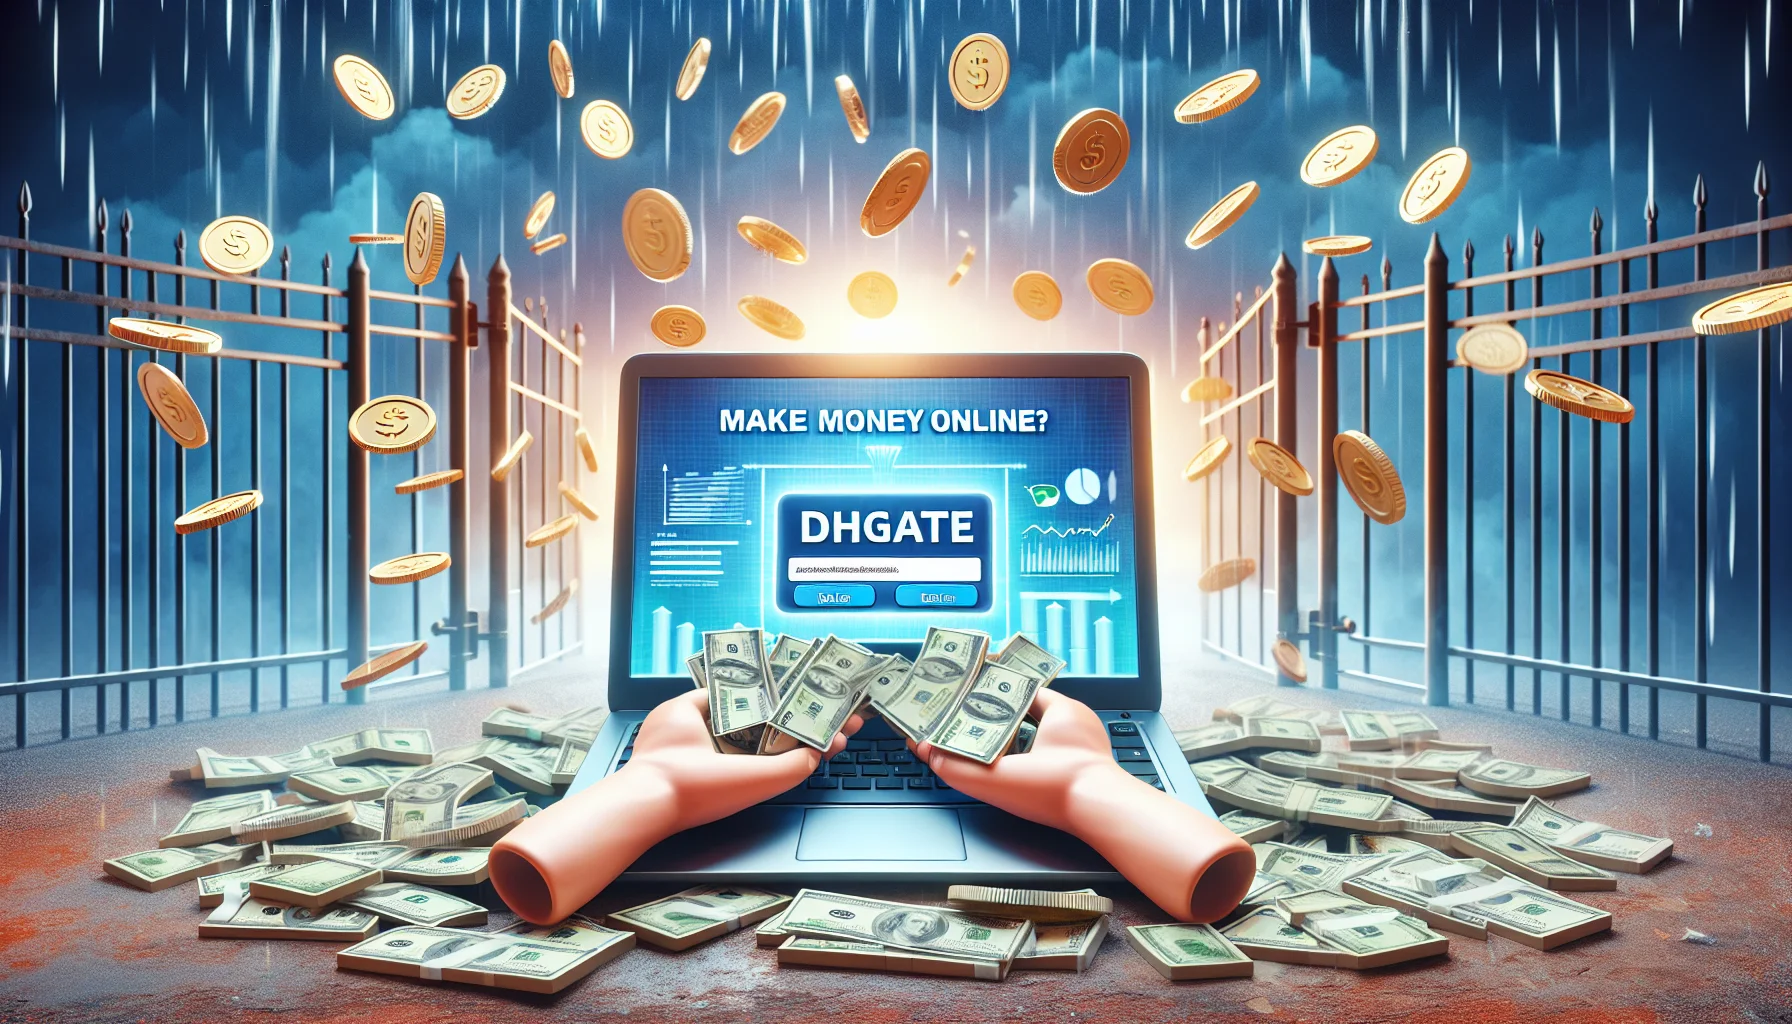 Imagine a humorous yet realistic scenario related to the concept of making money online. In the center of the scene, visualize a digital laptop screen displaying a sample of an affiliate program, with the name 'dhgate' written clearly. Surrounding the scenario are indications of successfully earning income online. Perhaps there are digital coins raining down on the laptop, or some kind of animated chart showing growth and success in the background. The intention should be to portray the exciting and potentially lucrative world of affiliate marketing.